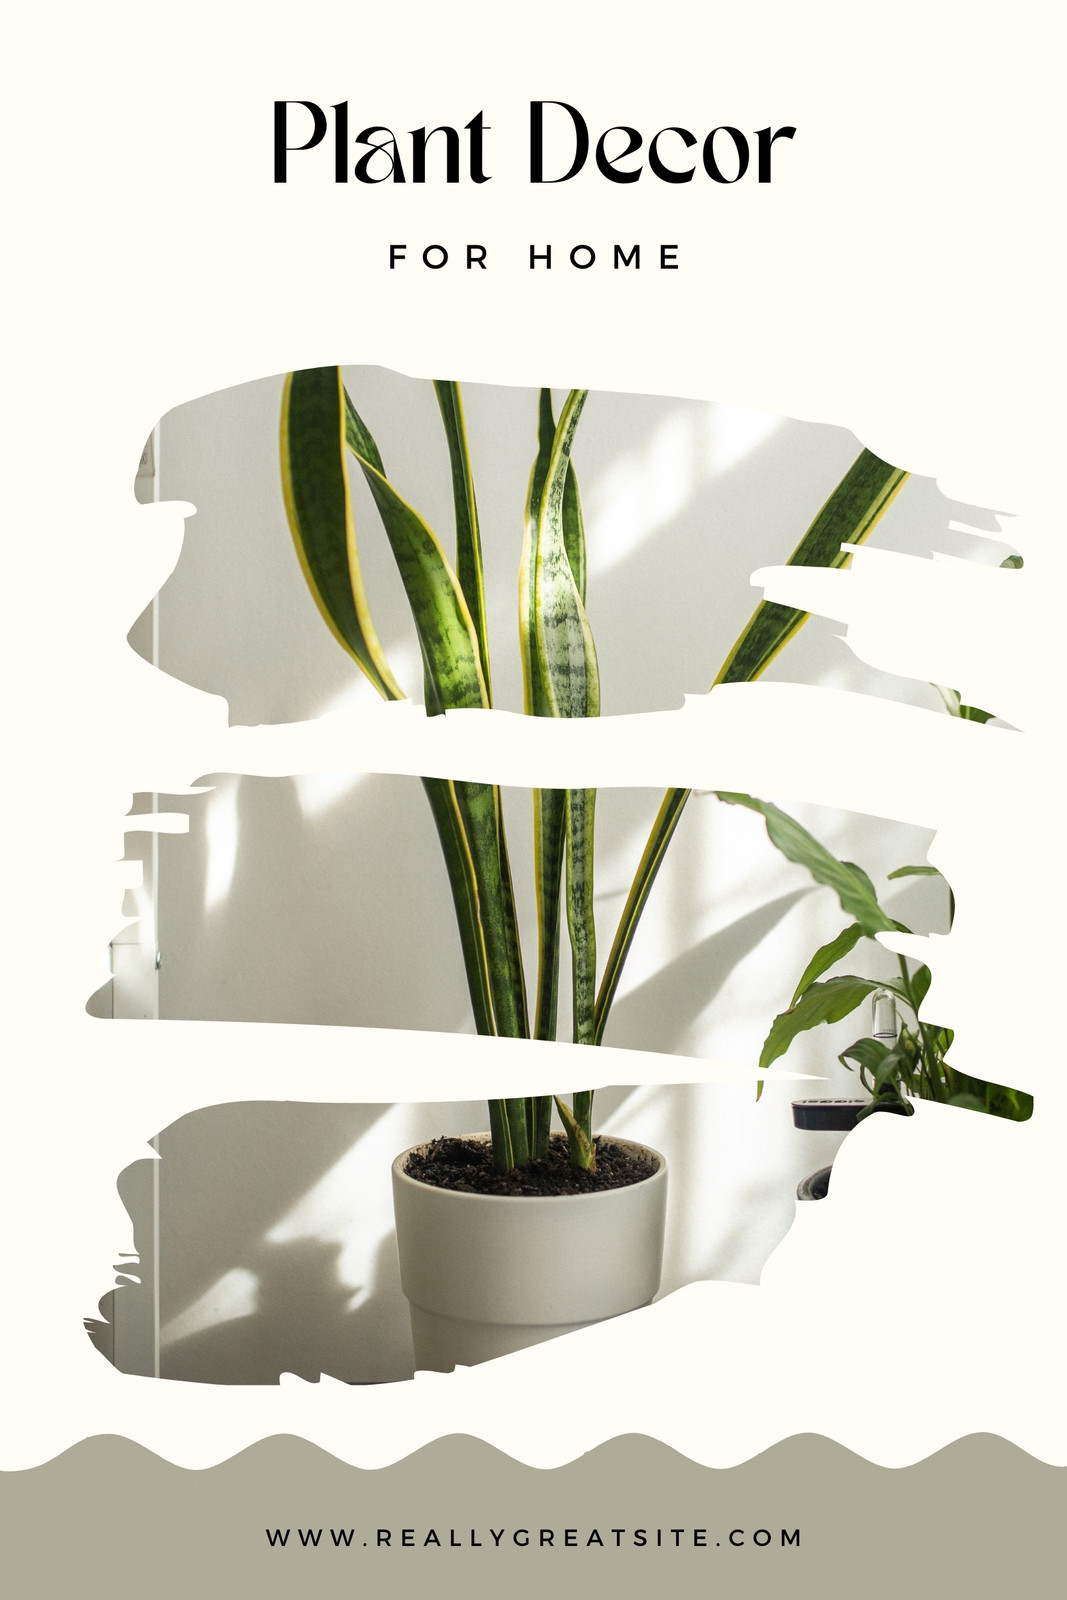 Free and customizable plants templates